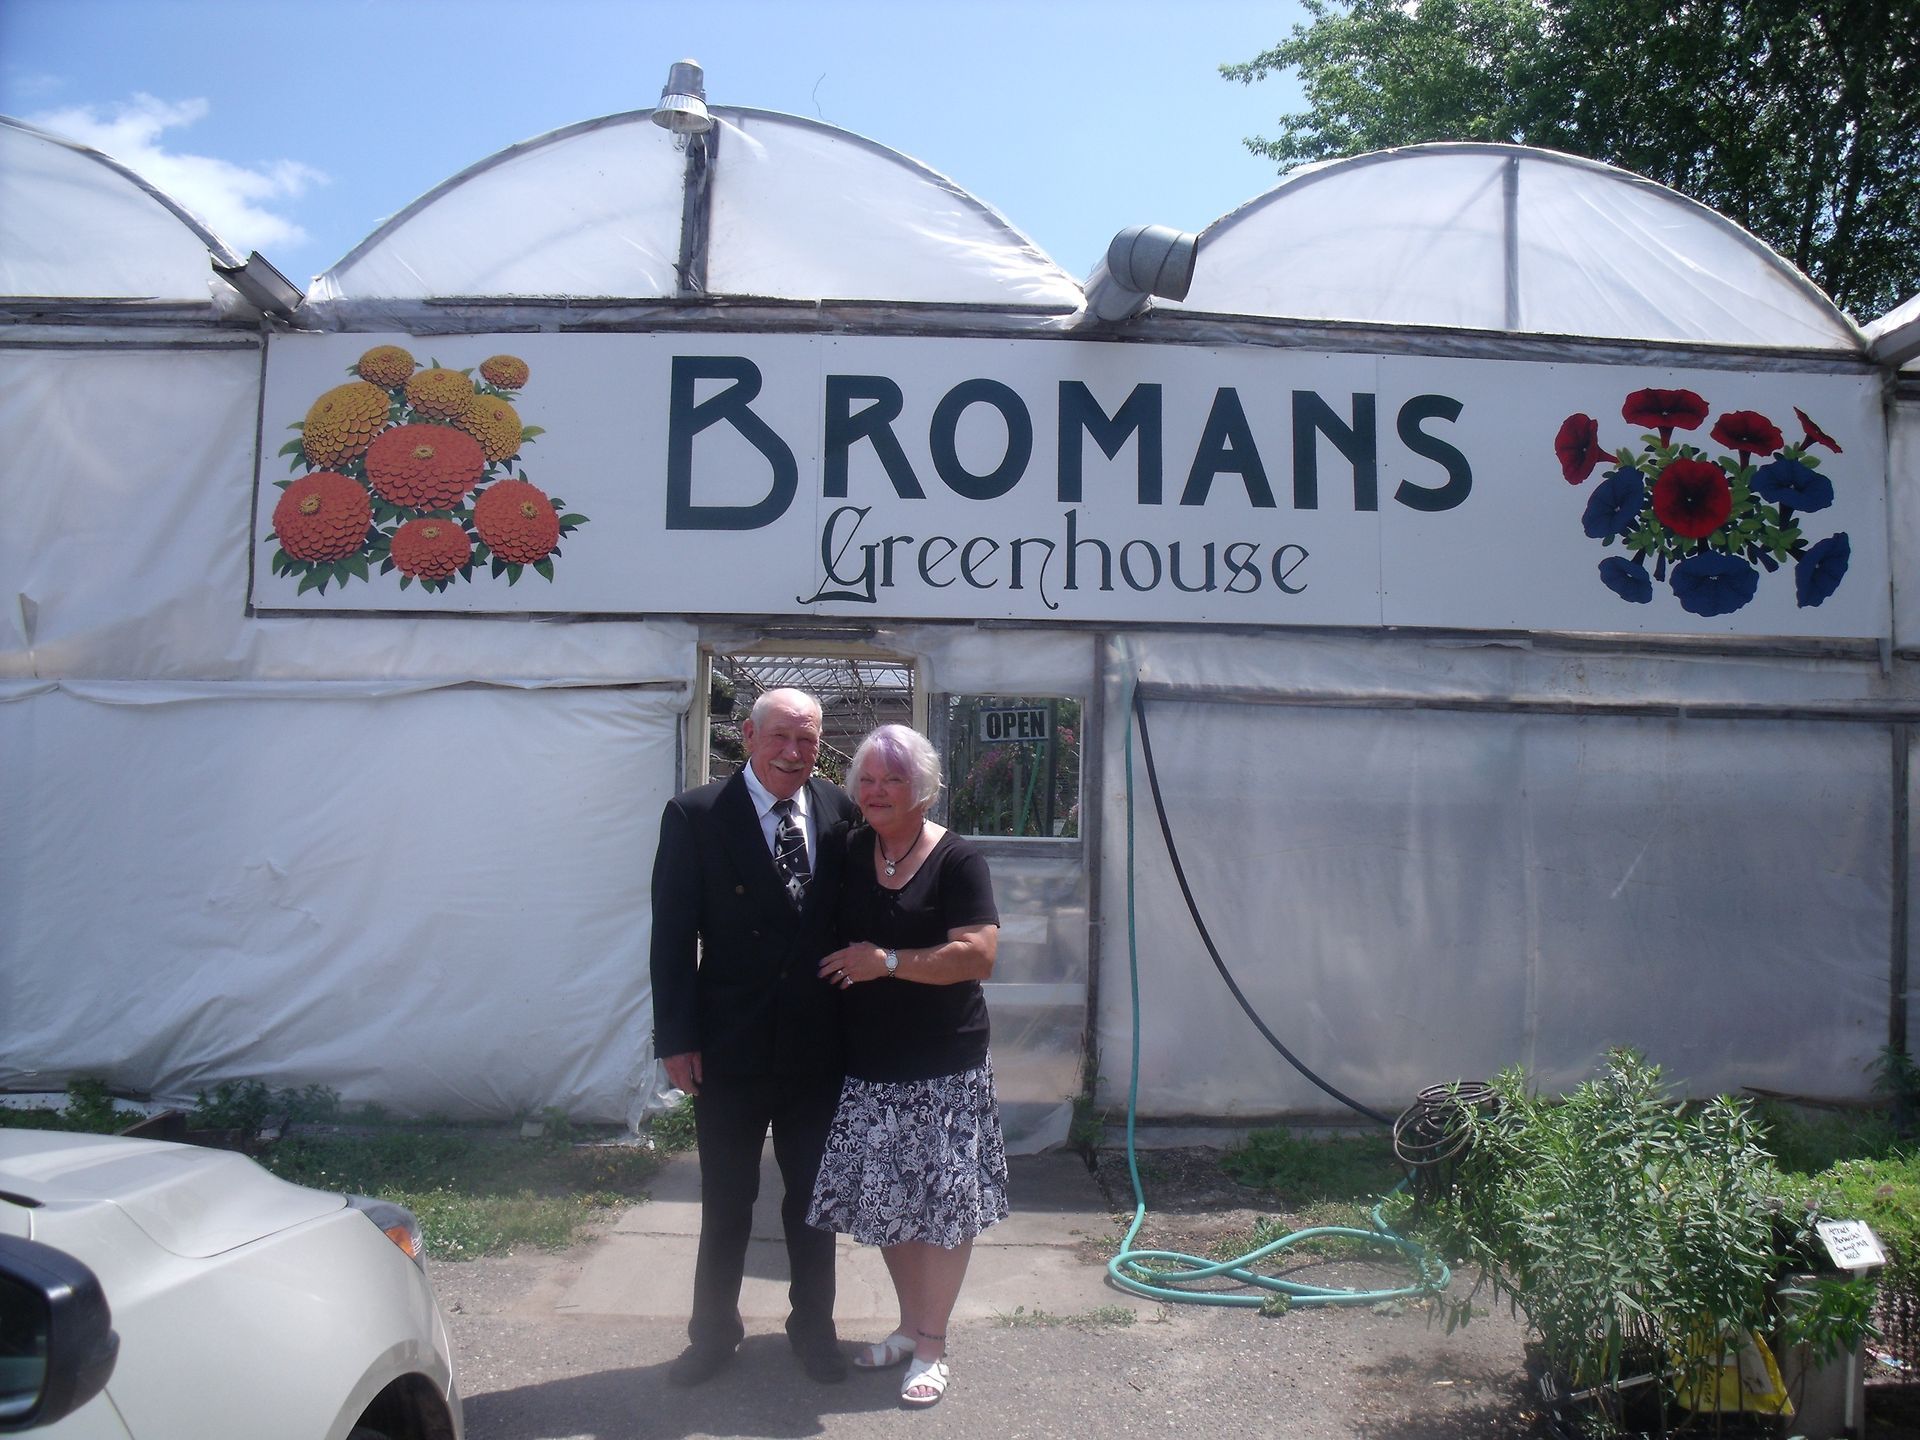 a man and woman standing in front of a Broman's greenhouse